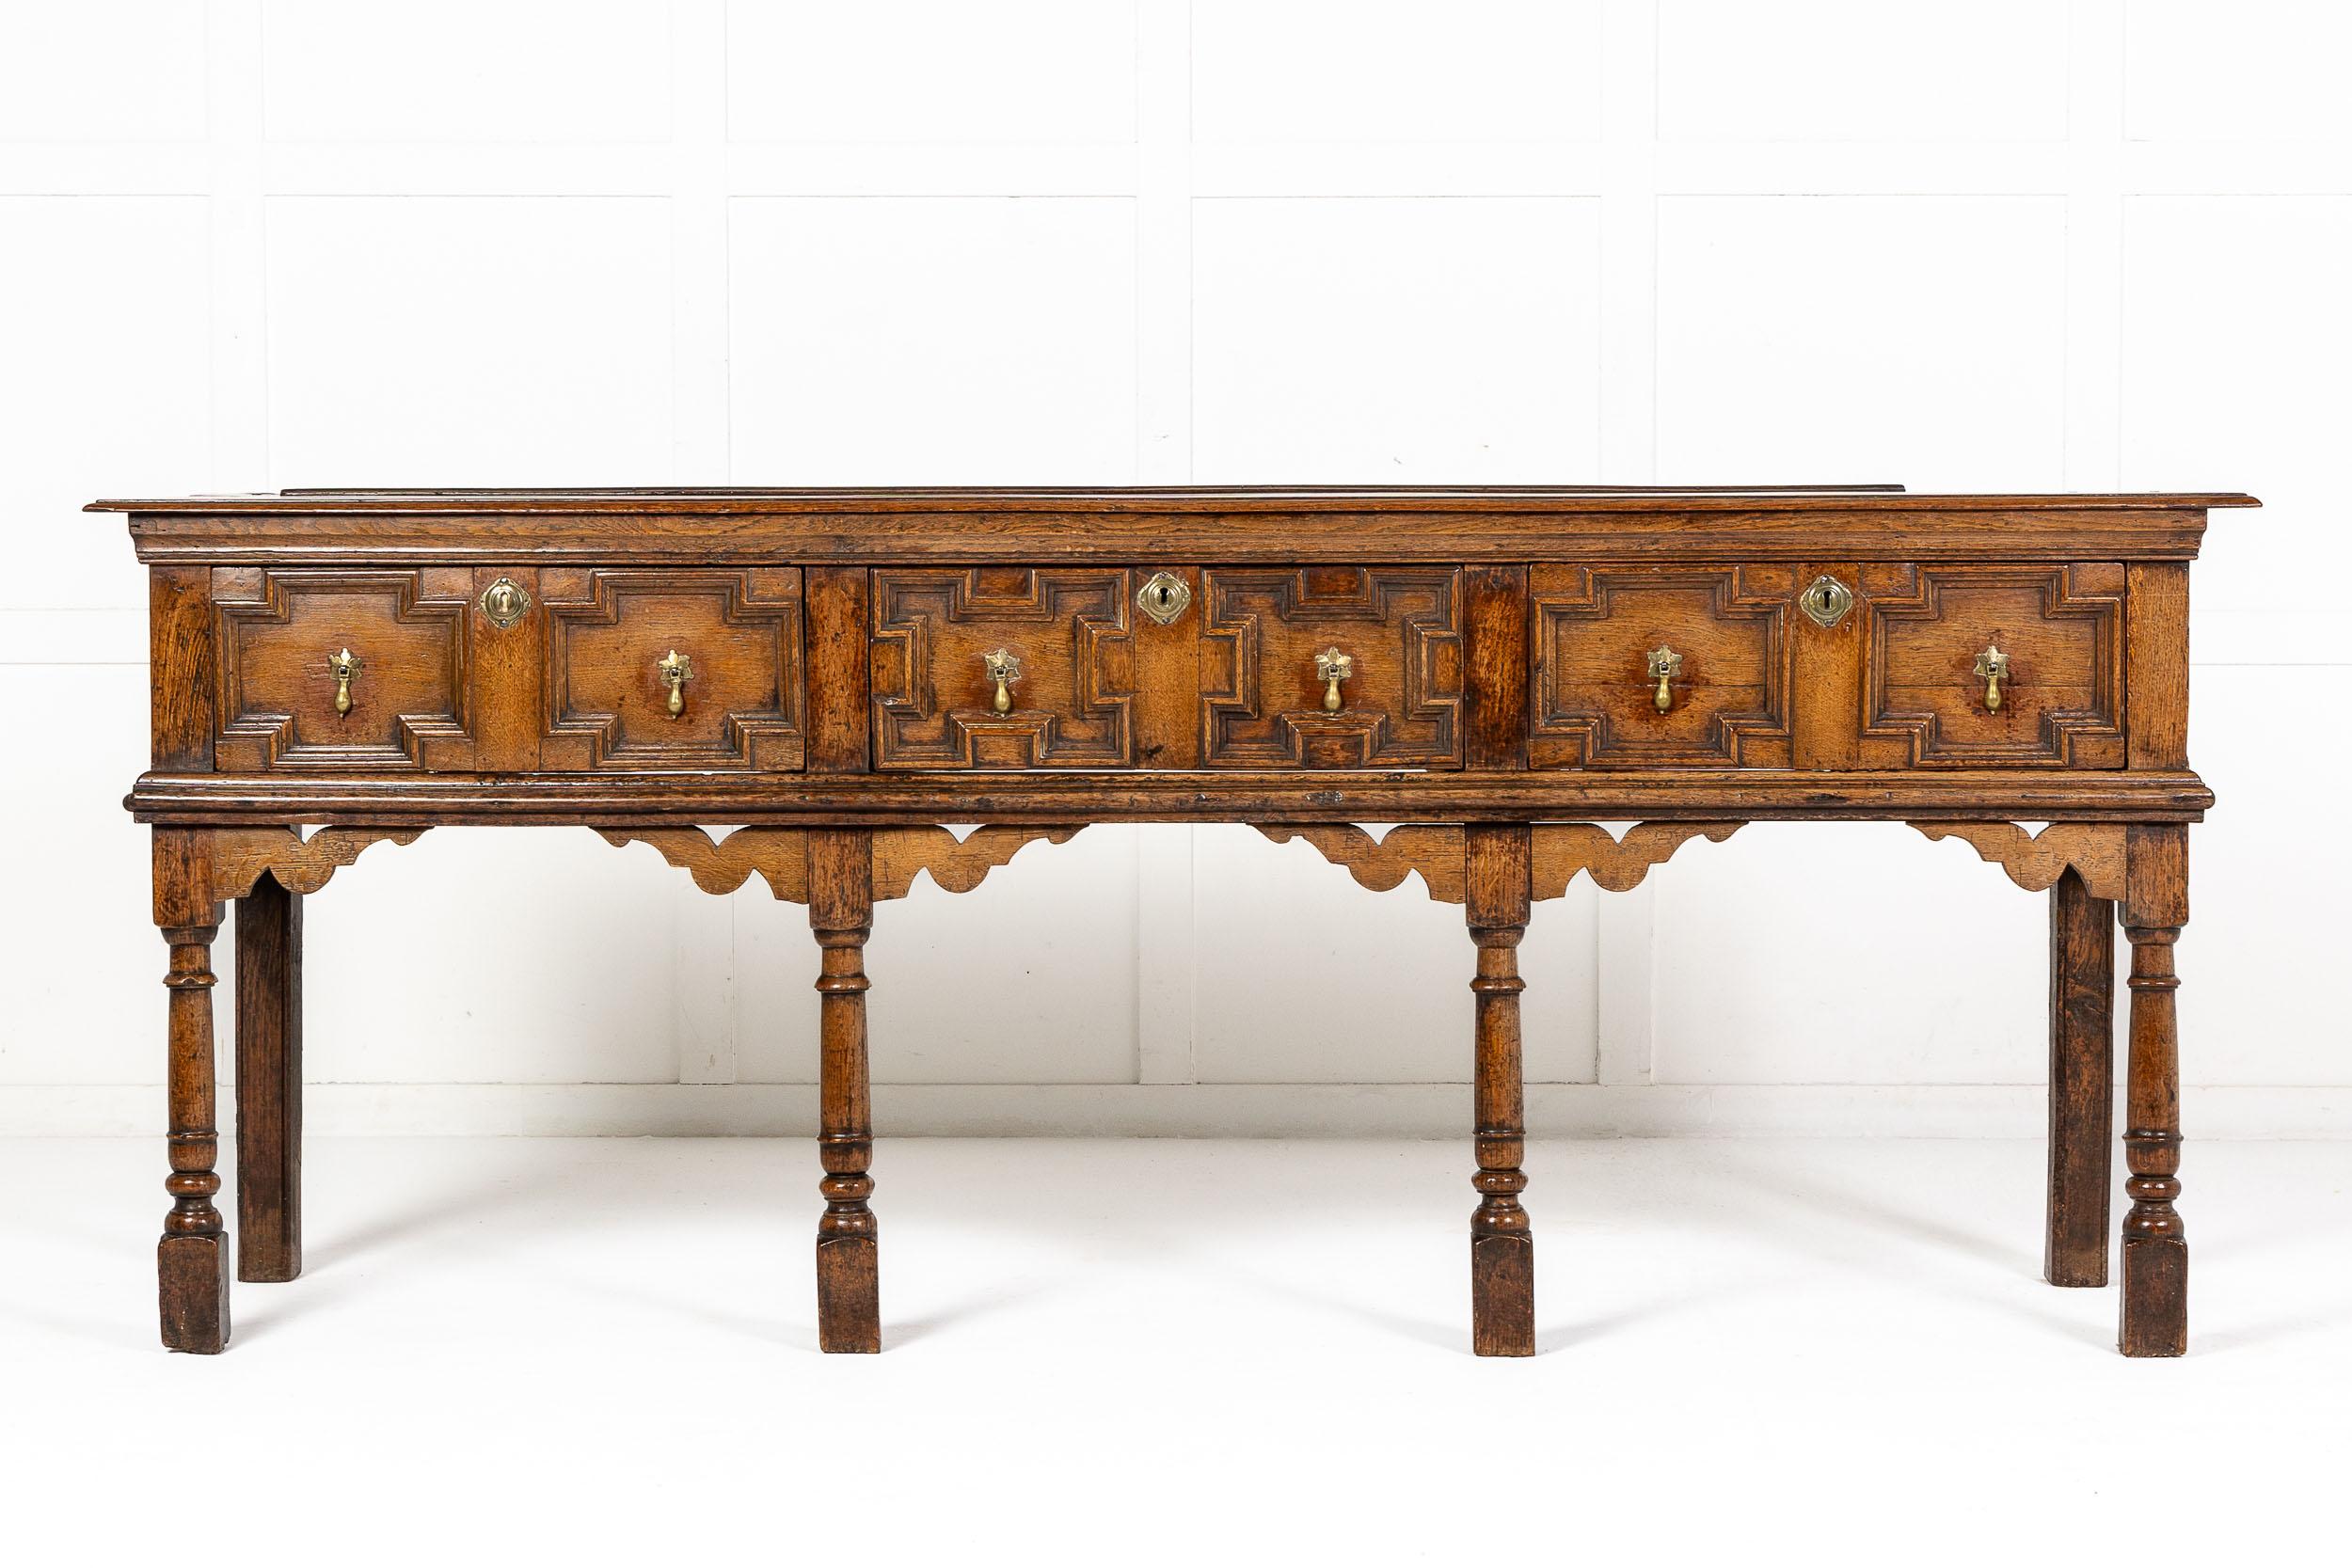 17th century English oak dresser base with a moulded edge, plank top and three deep drawers below with excellent moulded panels as geometric decoration, brass pull handles and escutcheons. Supported by four sturdy, turned front legs united by